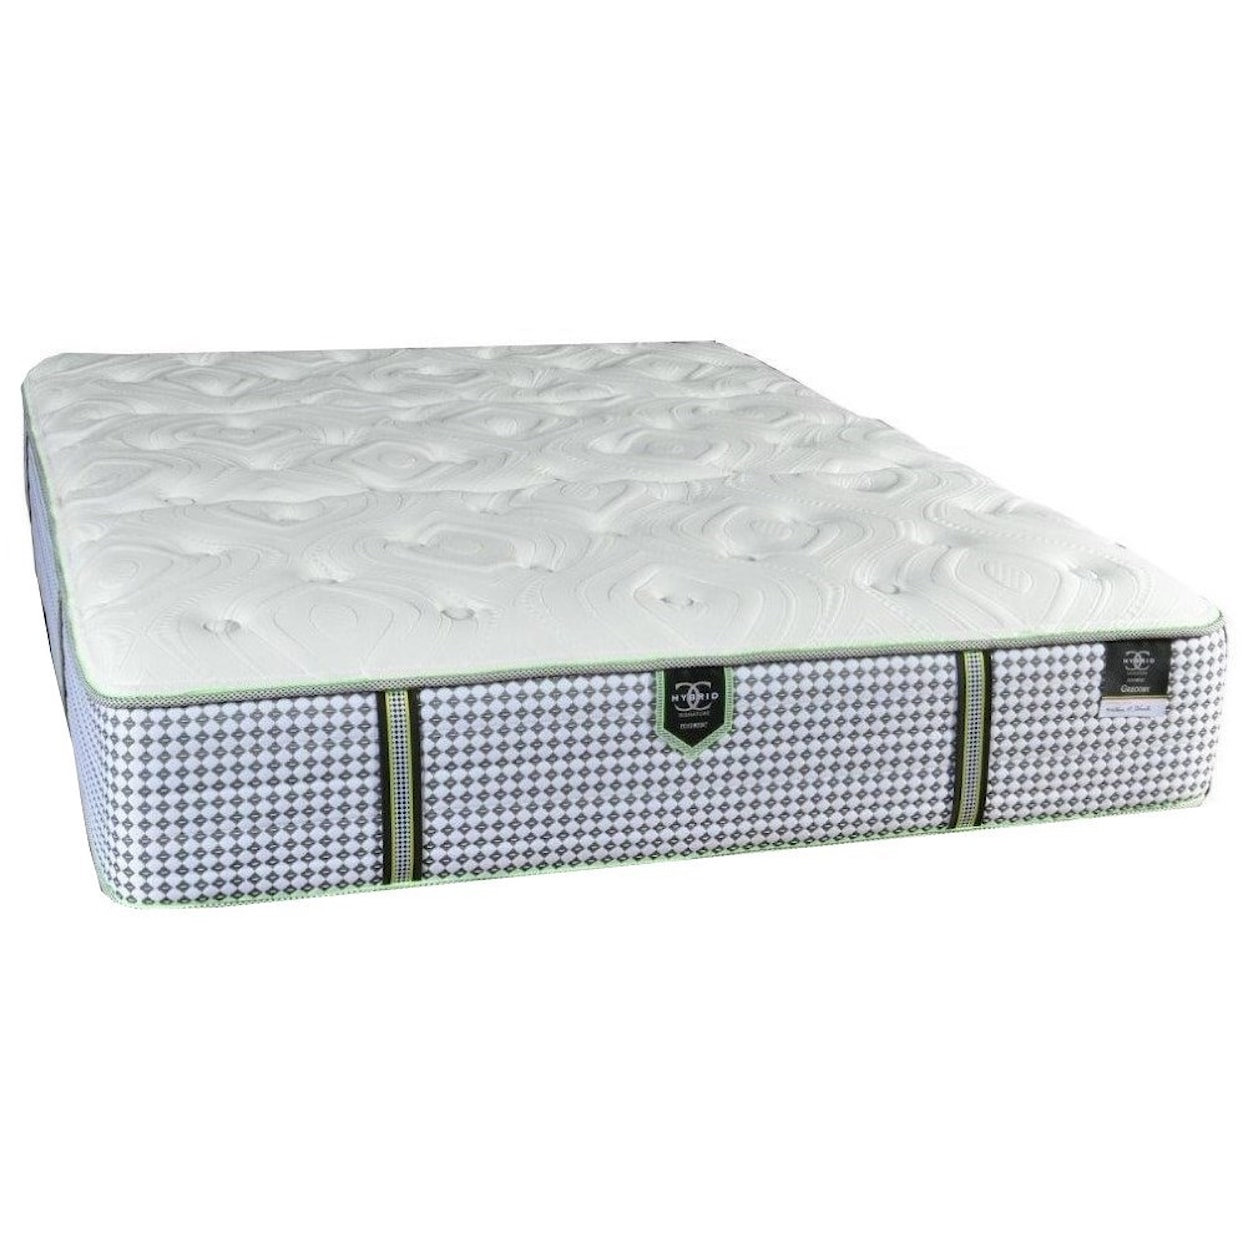 Restonic Gregory Firm Twin XL Pocketed Coil Mattress